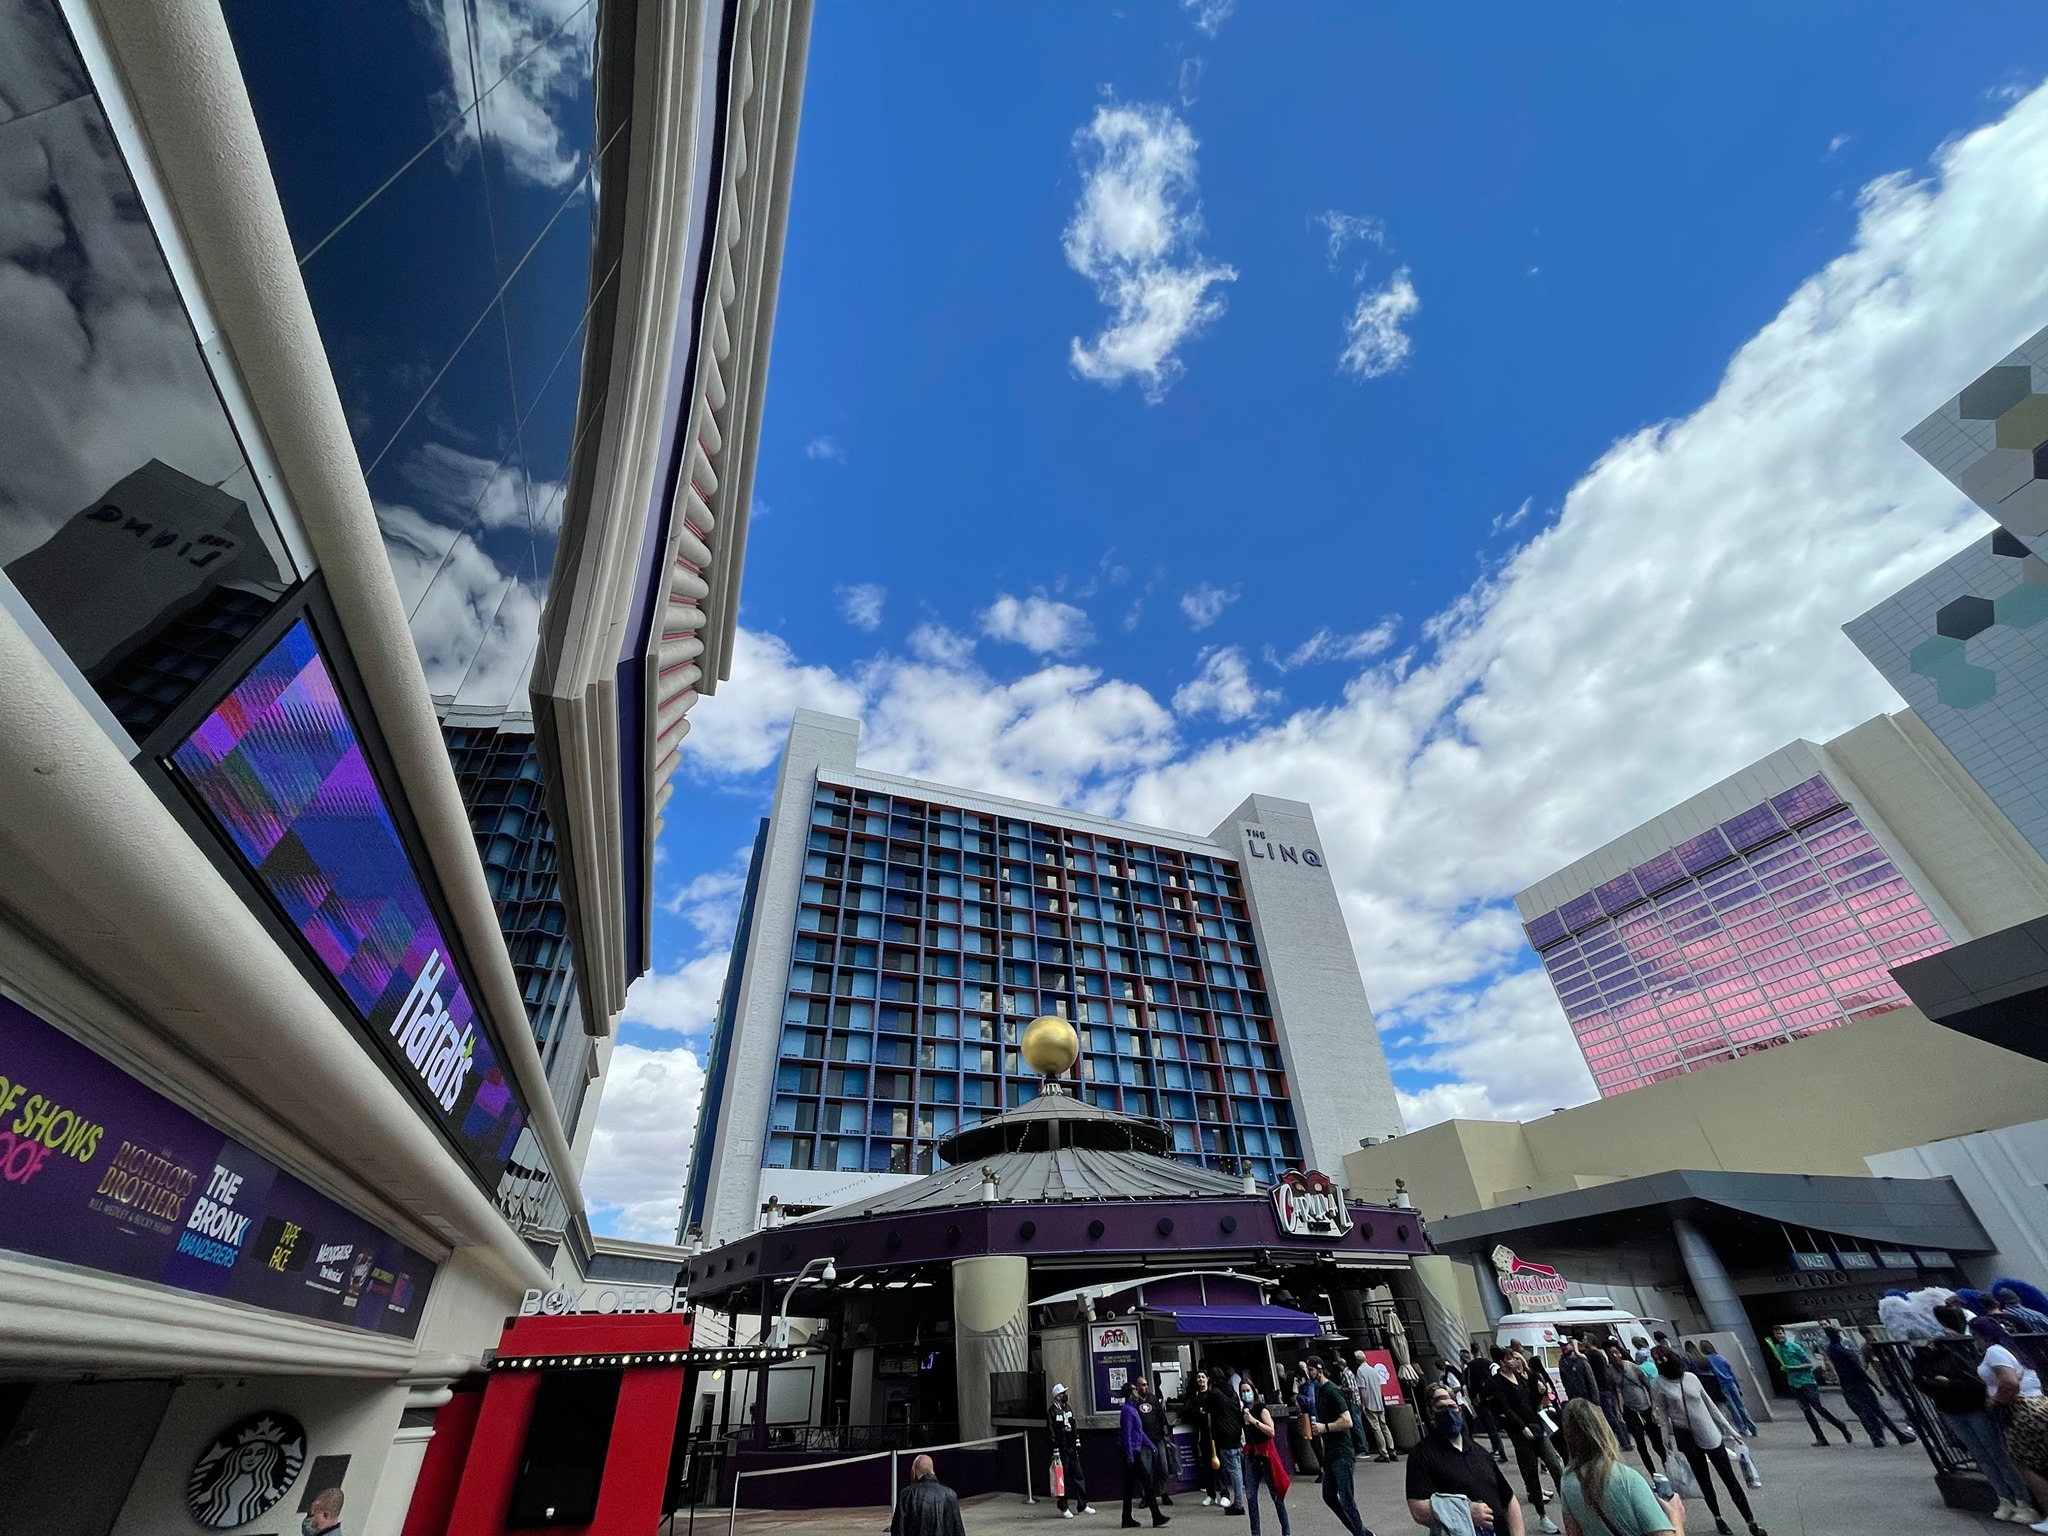 Fly LINQ Zipline at THE LINQ